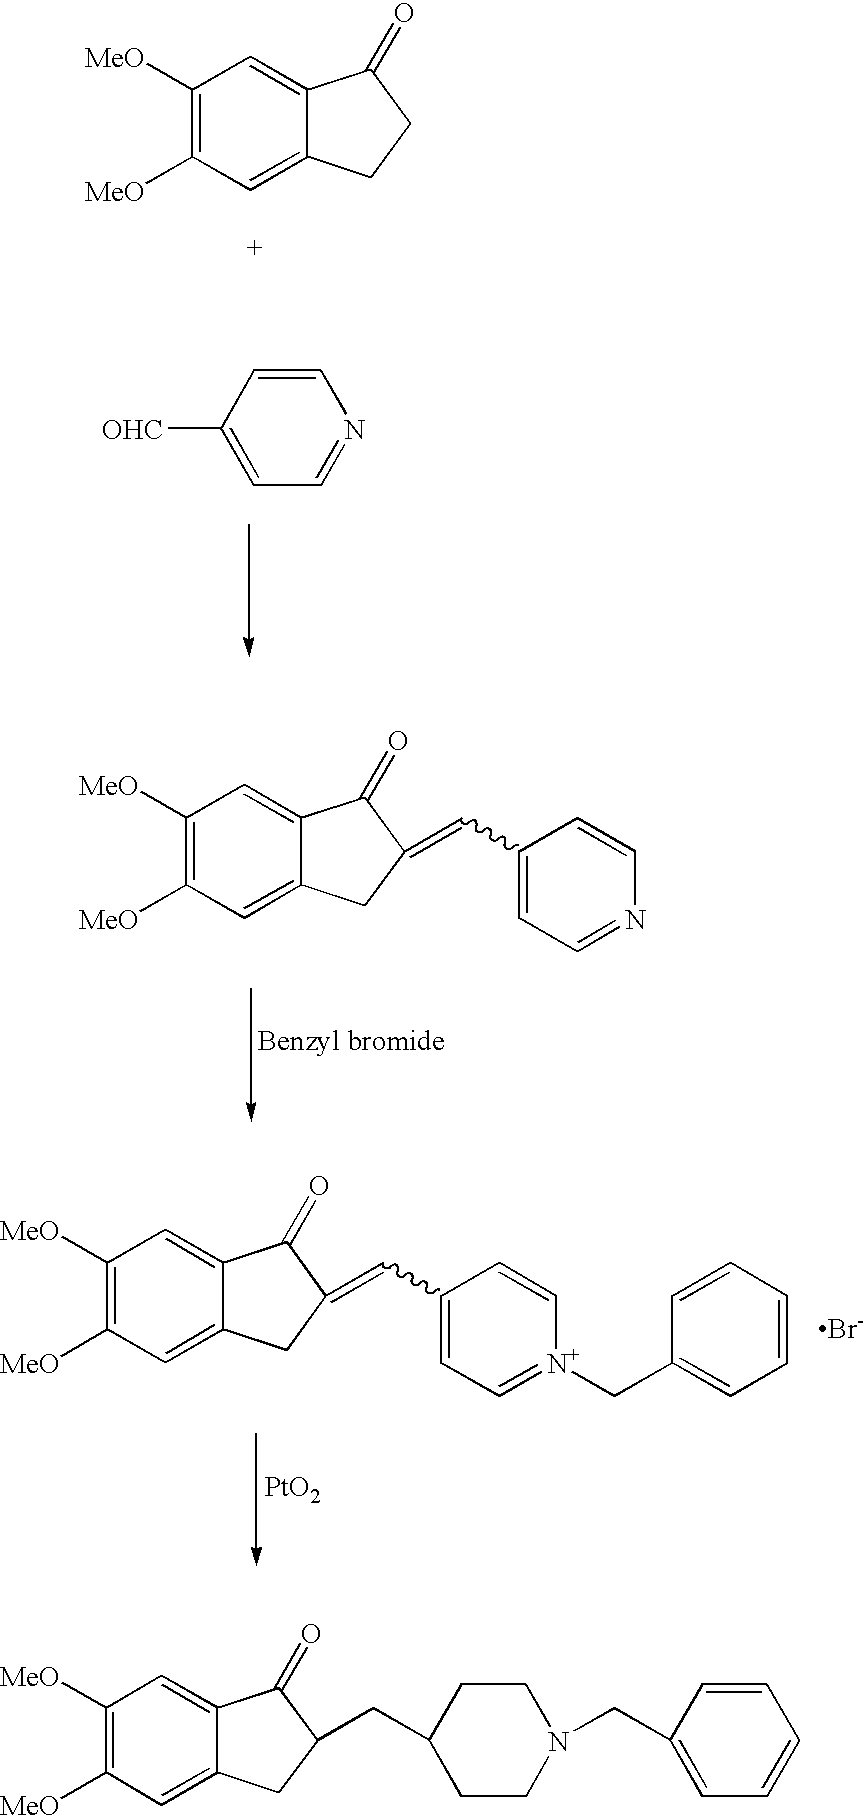 Preparation of intermediates for acetycholinesterase inhibitors